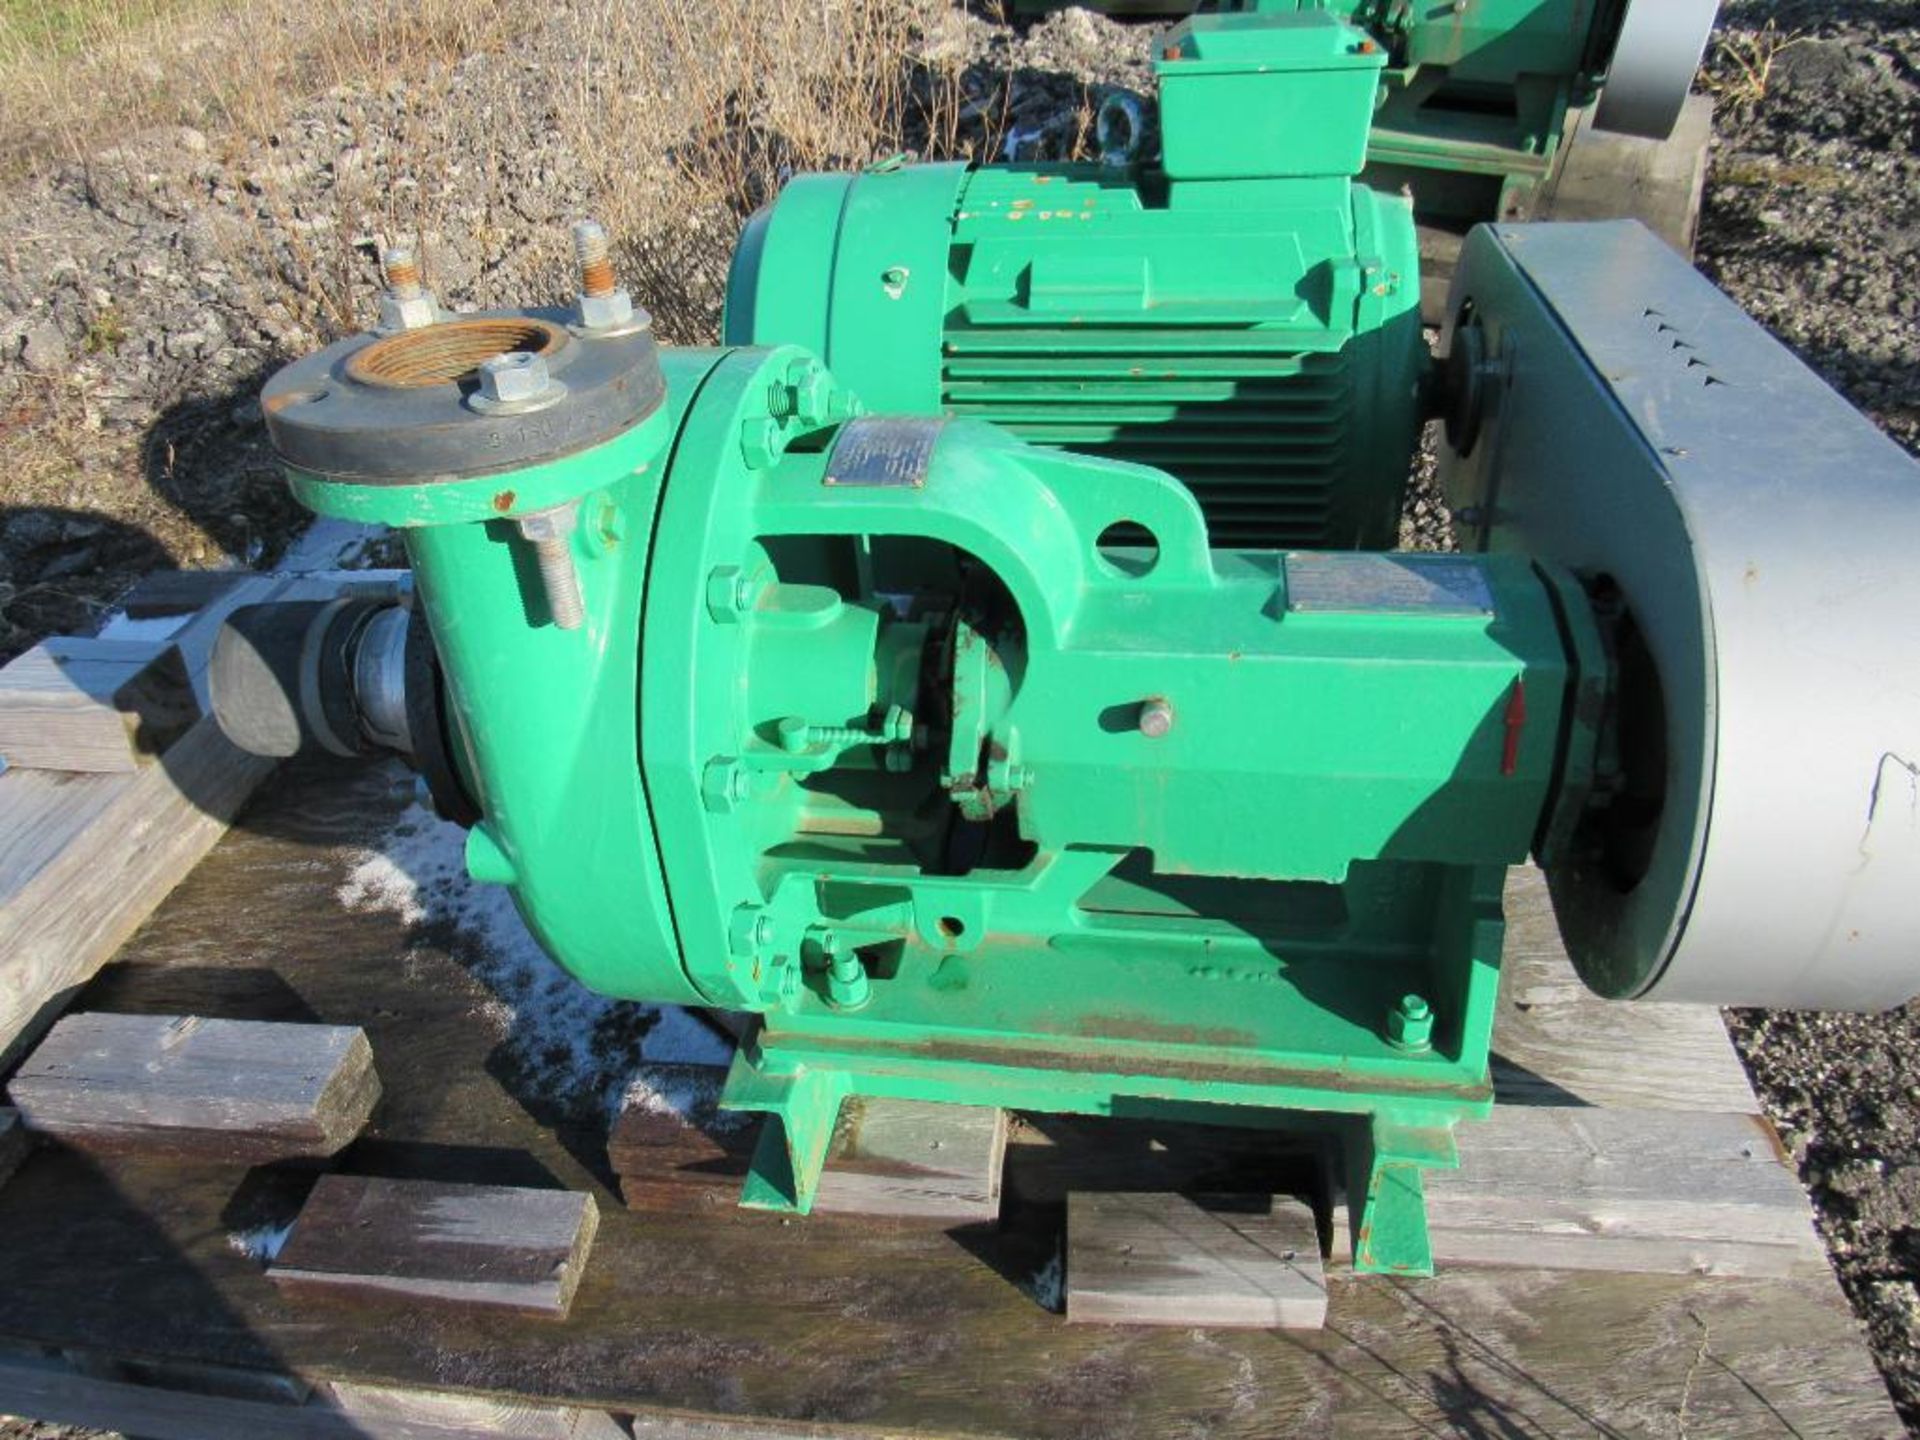 GN Solids Control Centrifugal Pump Model GNSB4*3C-13J-45, S/N 70701021 (2017), 1900 RPM, 45 Kw Motor - Image 5 of 6